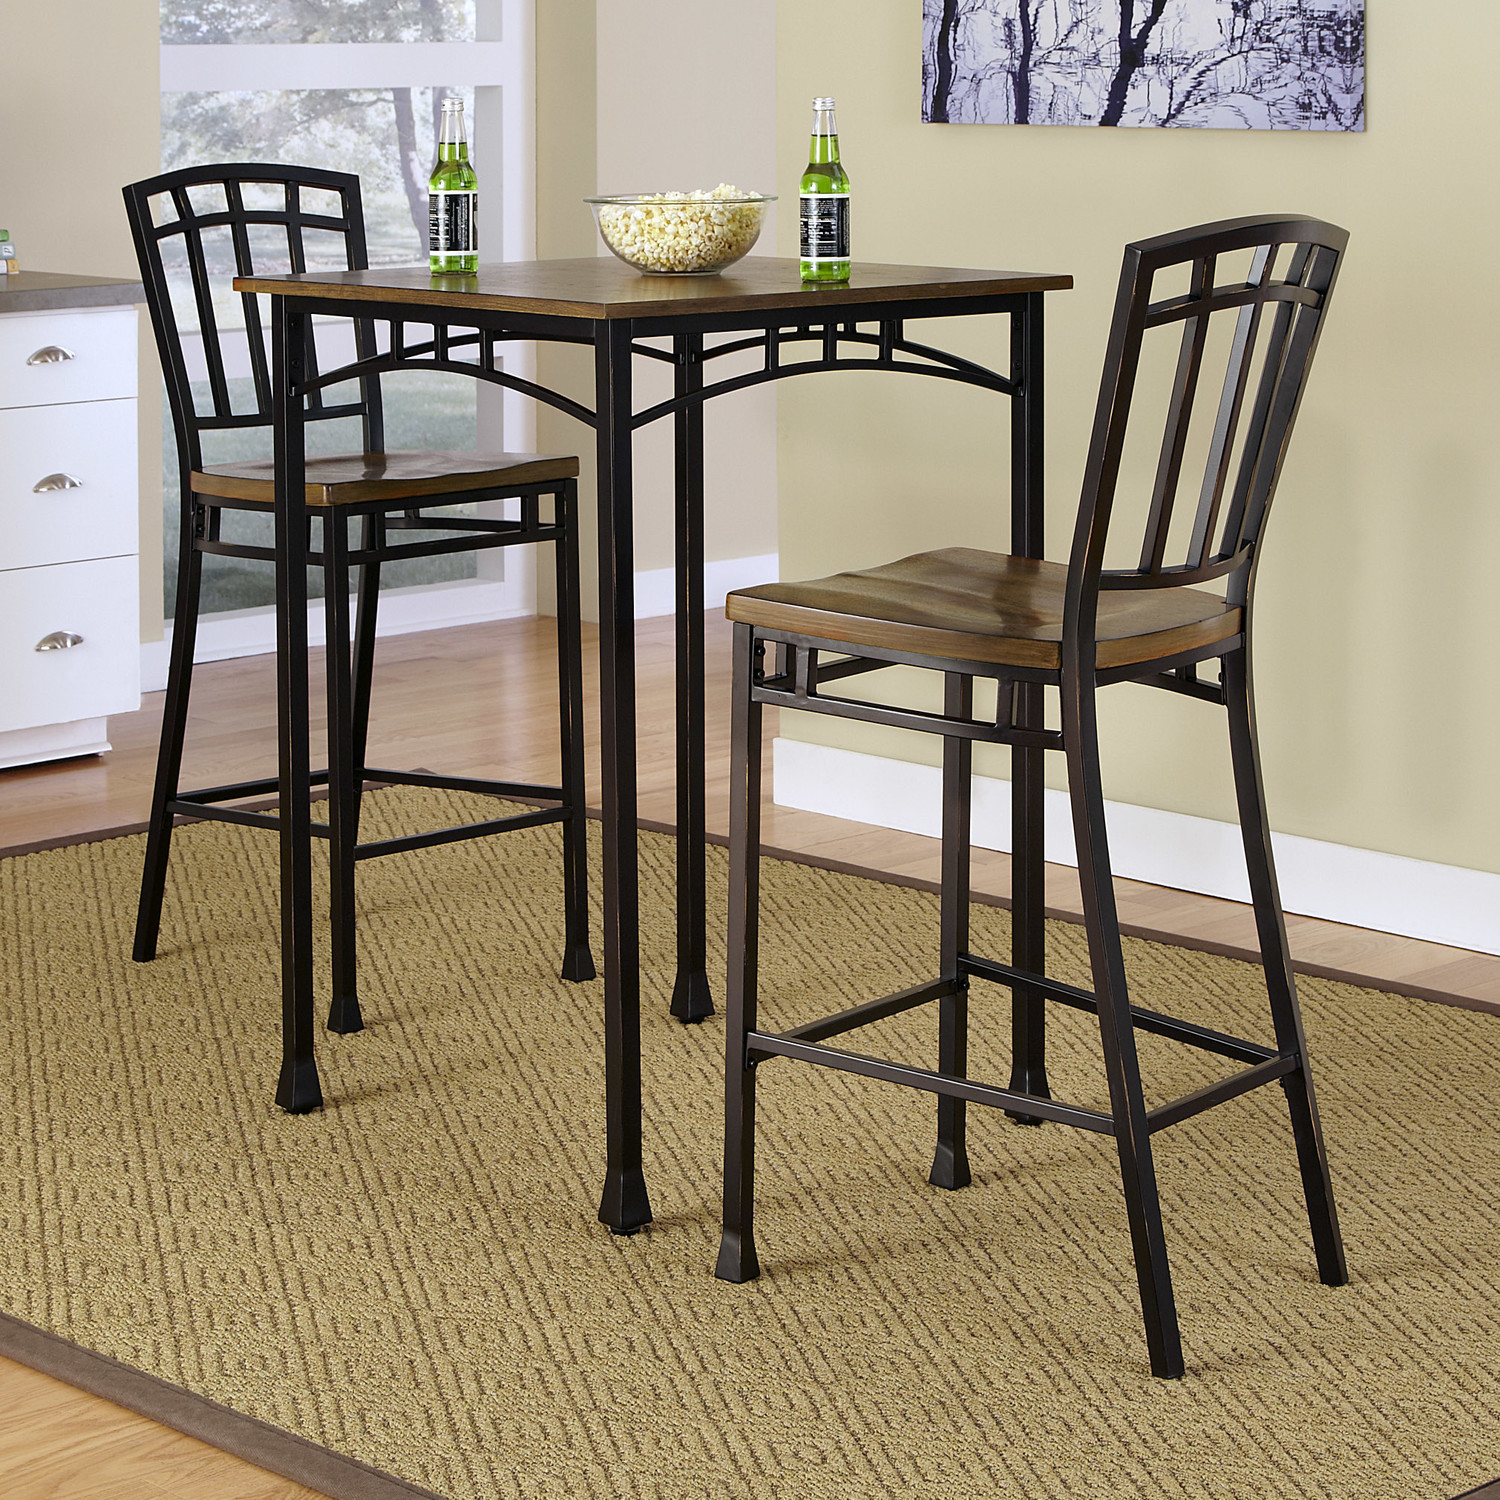 Small Kitchen Bistro Set Awesome From Classic And Simple To Modern Style Of Small Pub Table Of Small Kitchen Bistro Set 